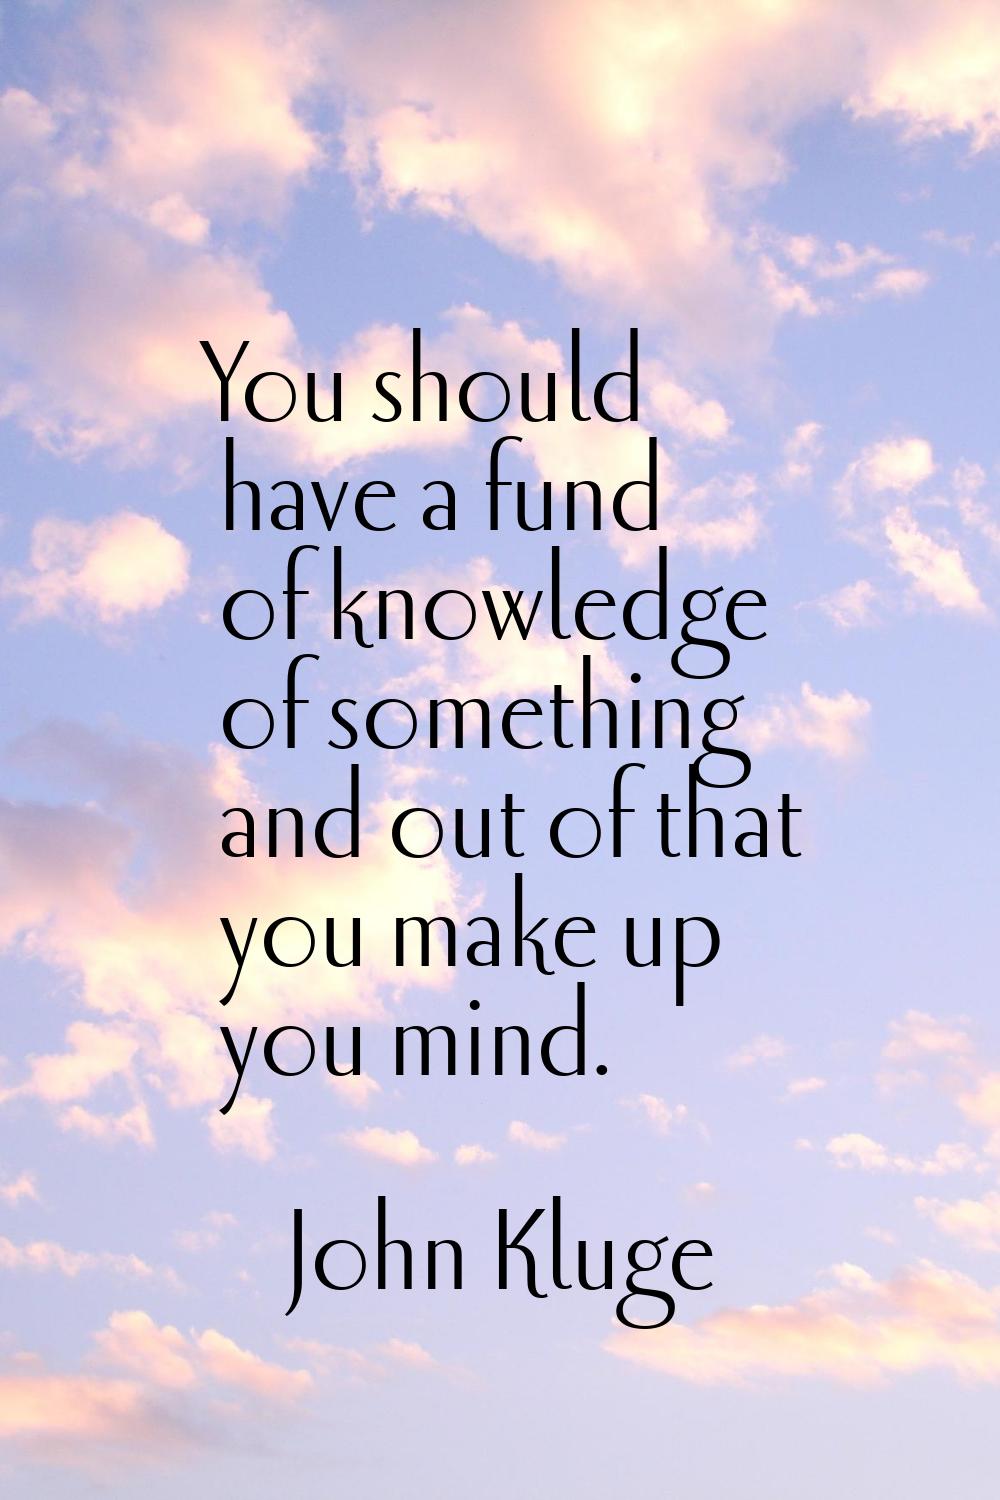 You should have a fund of knowledge of something and out of that you make up you mind.